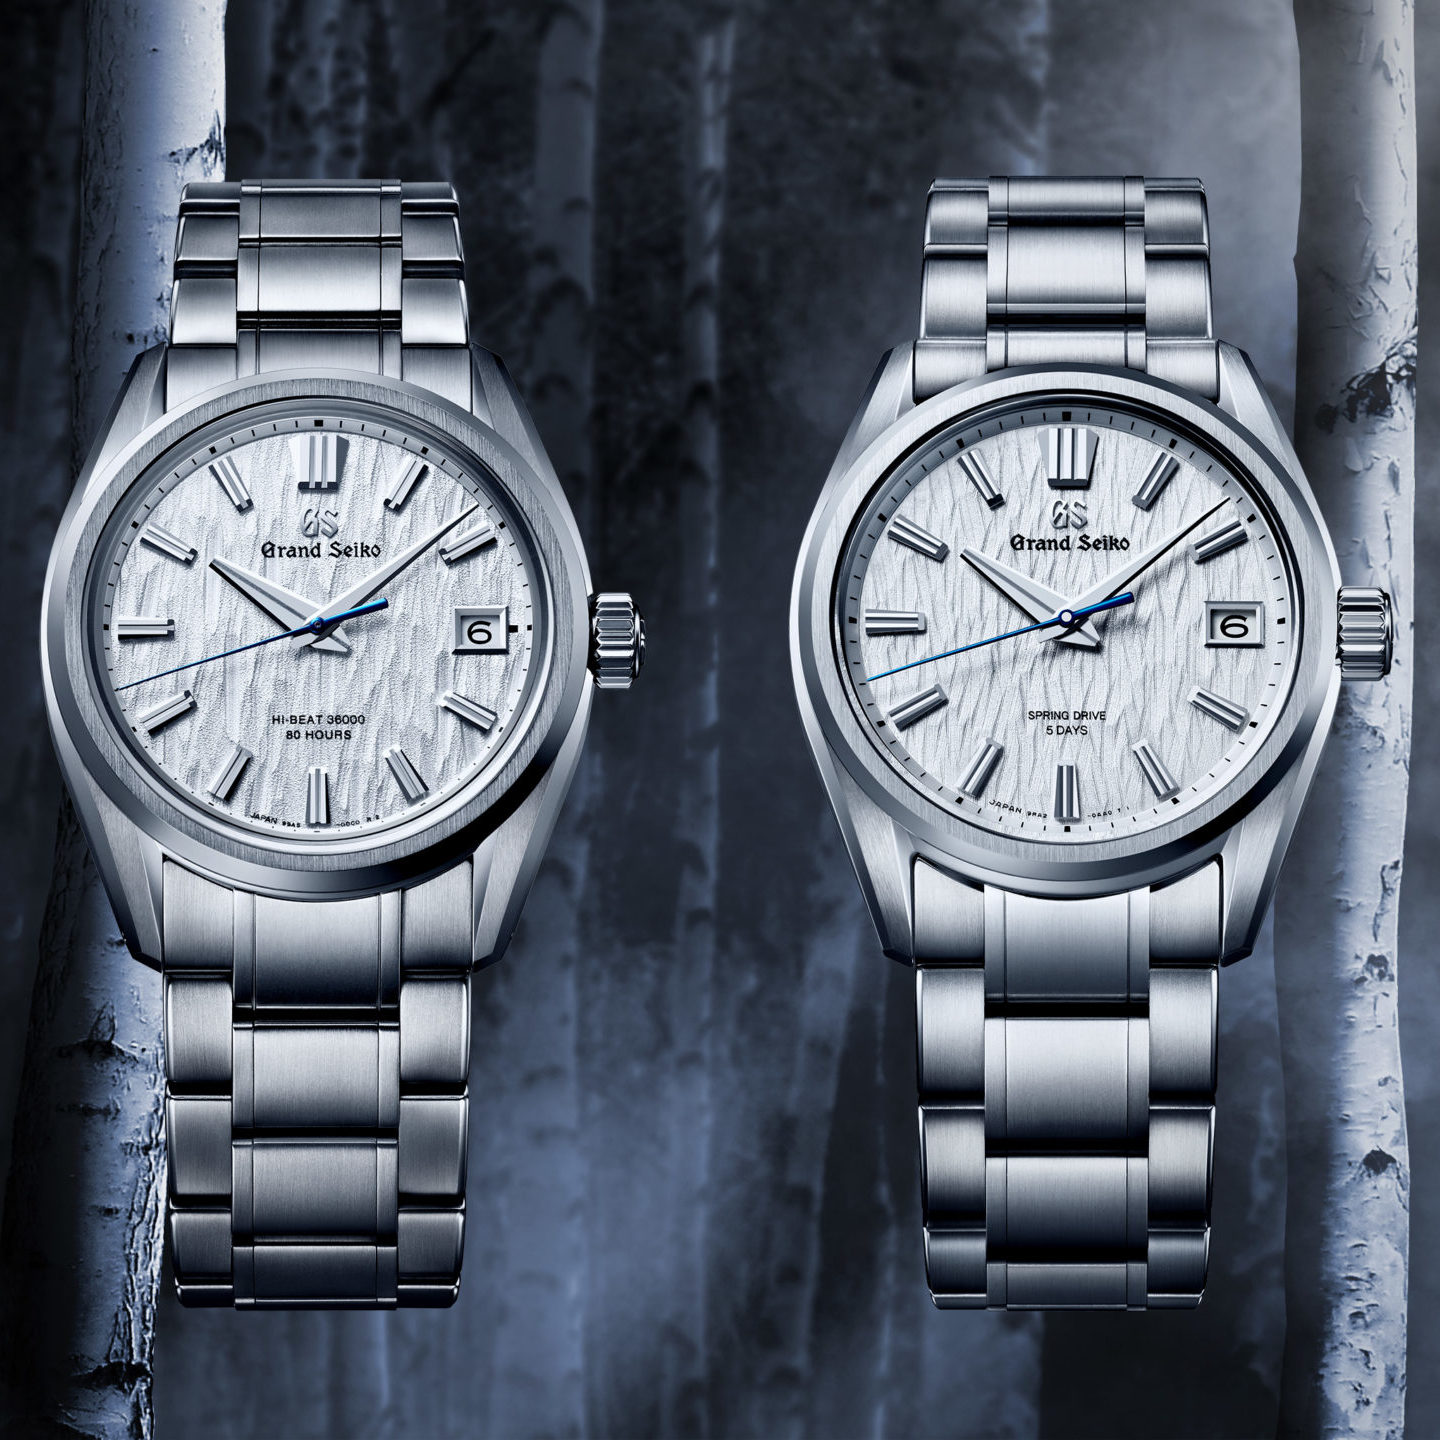 The differences between the Grand Seiko SLGA009 and SLGH005